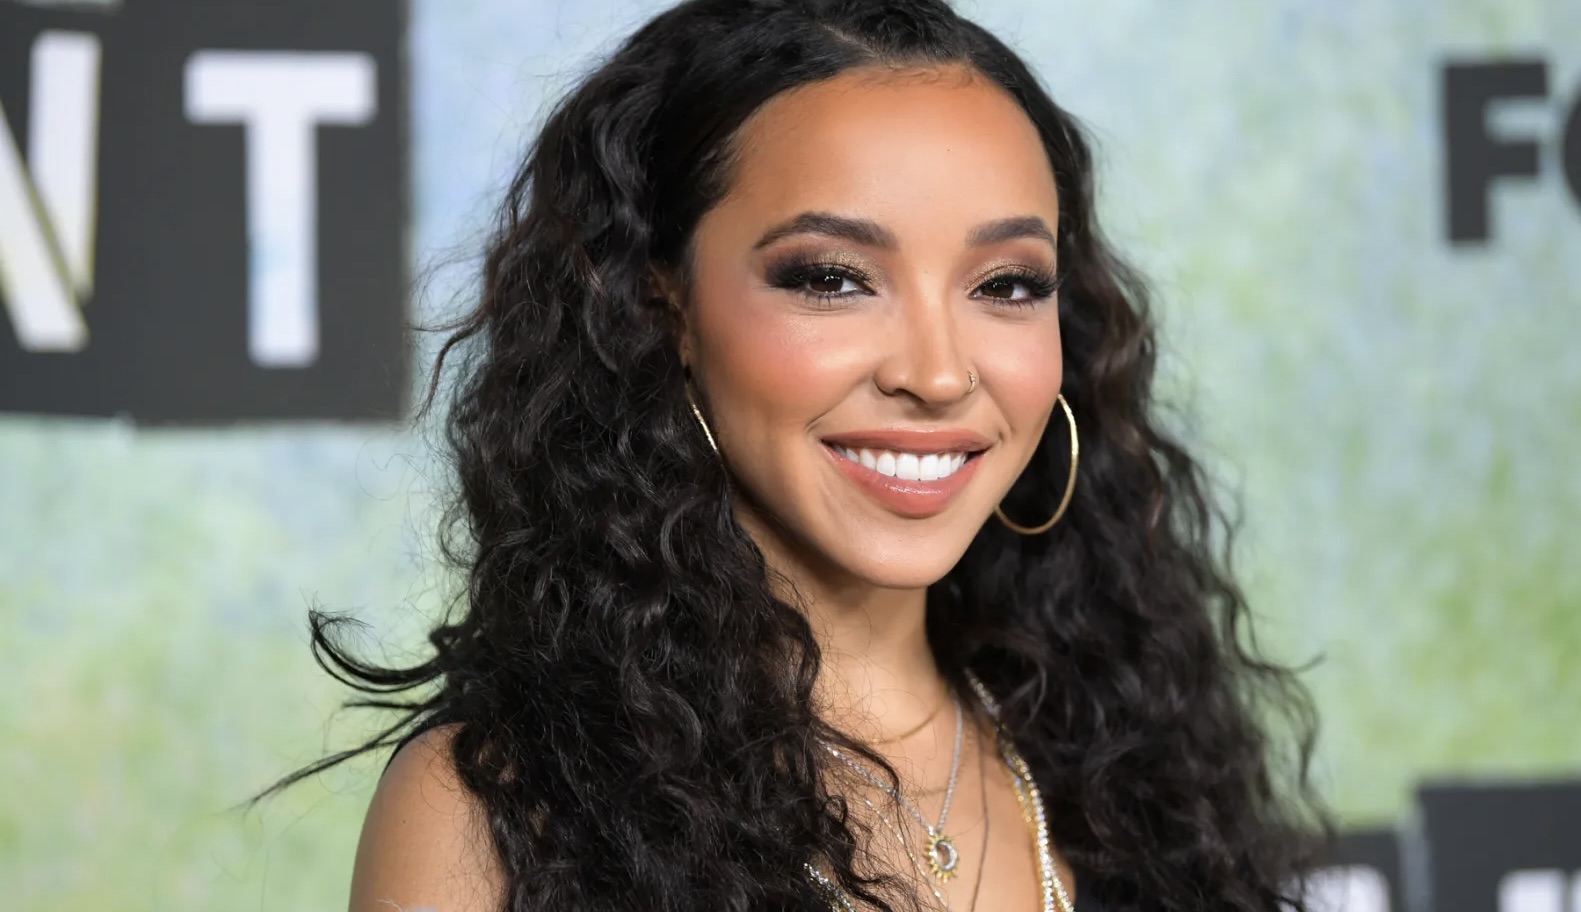 Tinashe Granted 3-Year Restraining Order Against Man Who Showed Up At Her Home